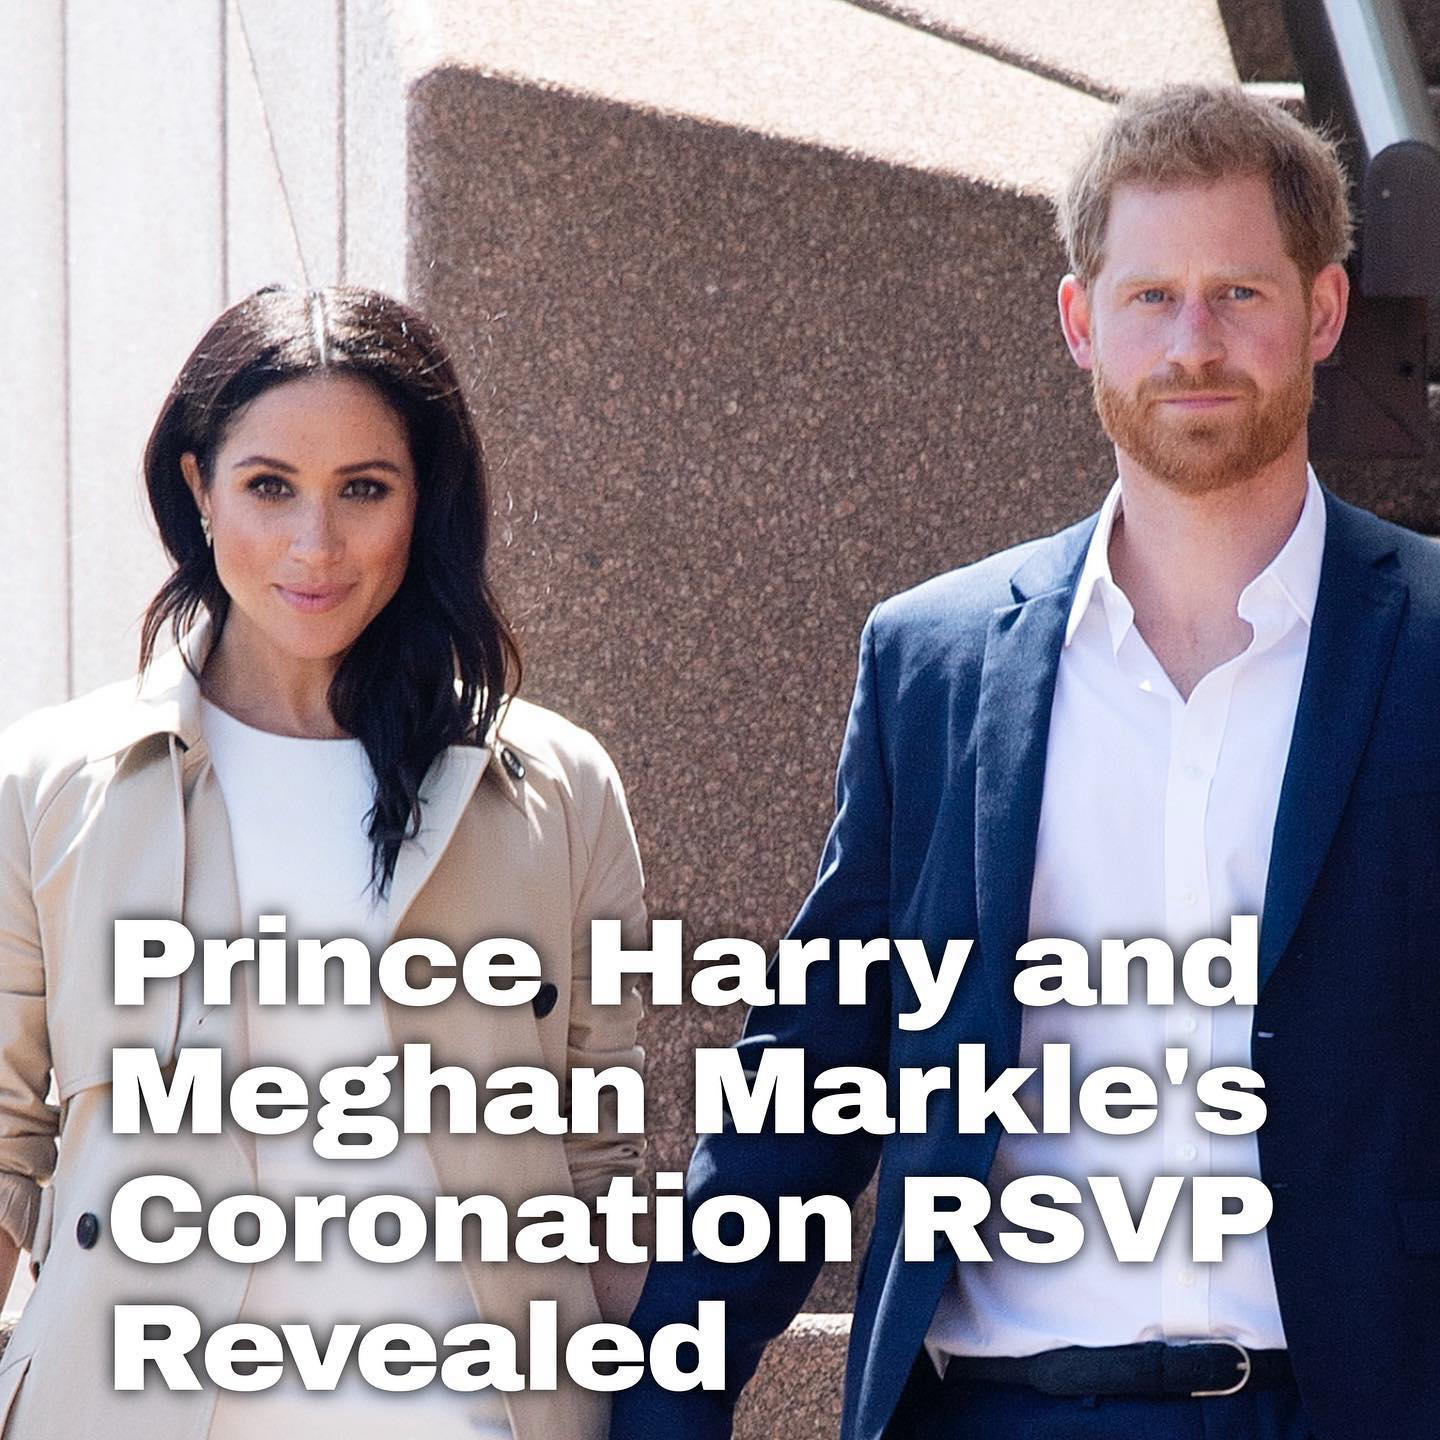 Prince Harry and Meghan Markle's Coronation RSVP has finally been revealed